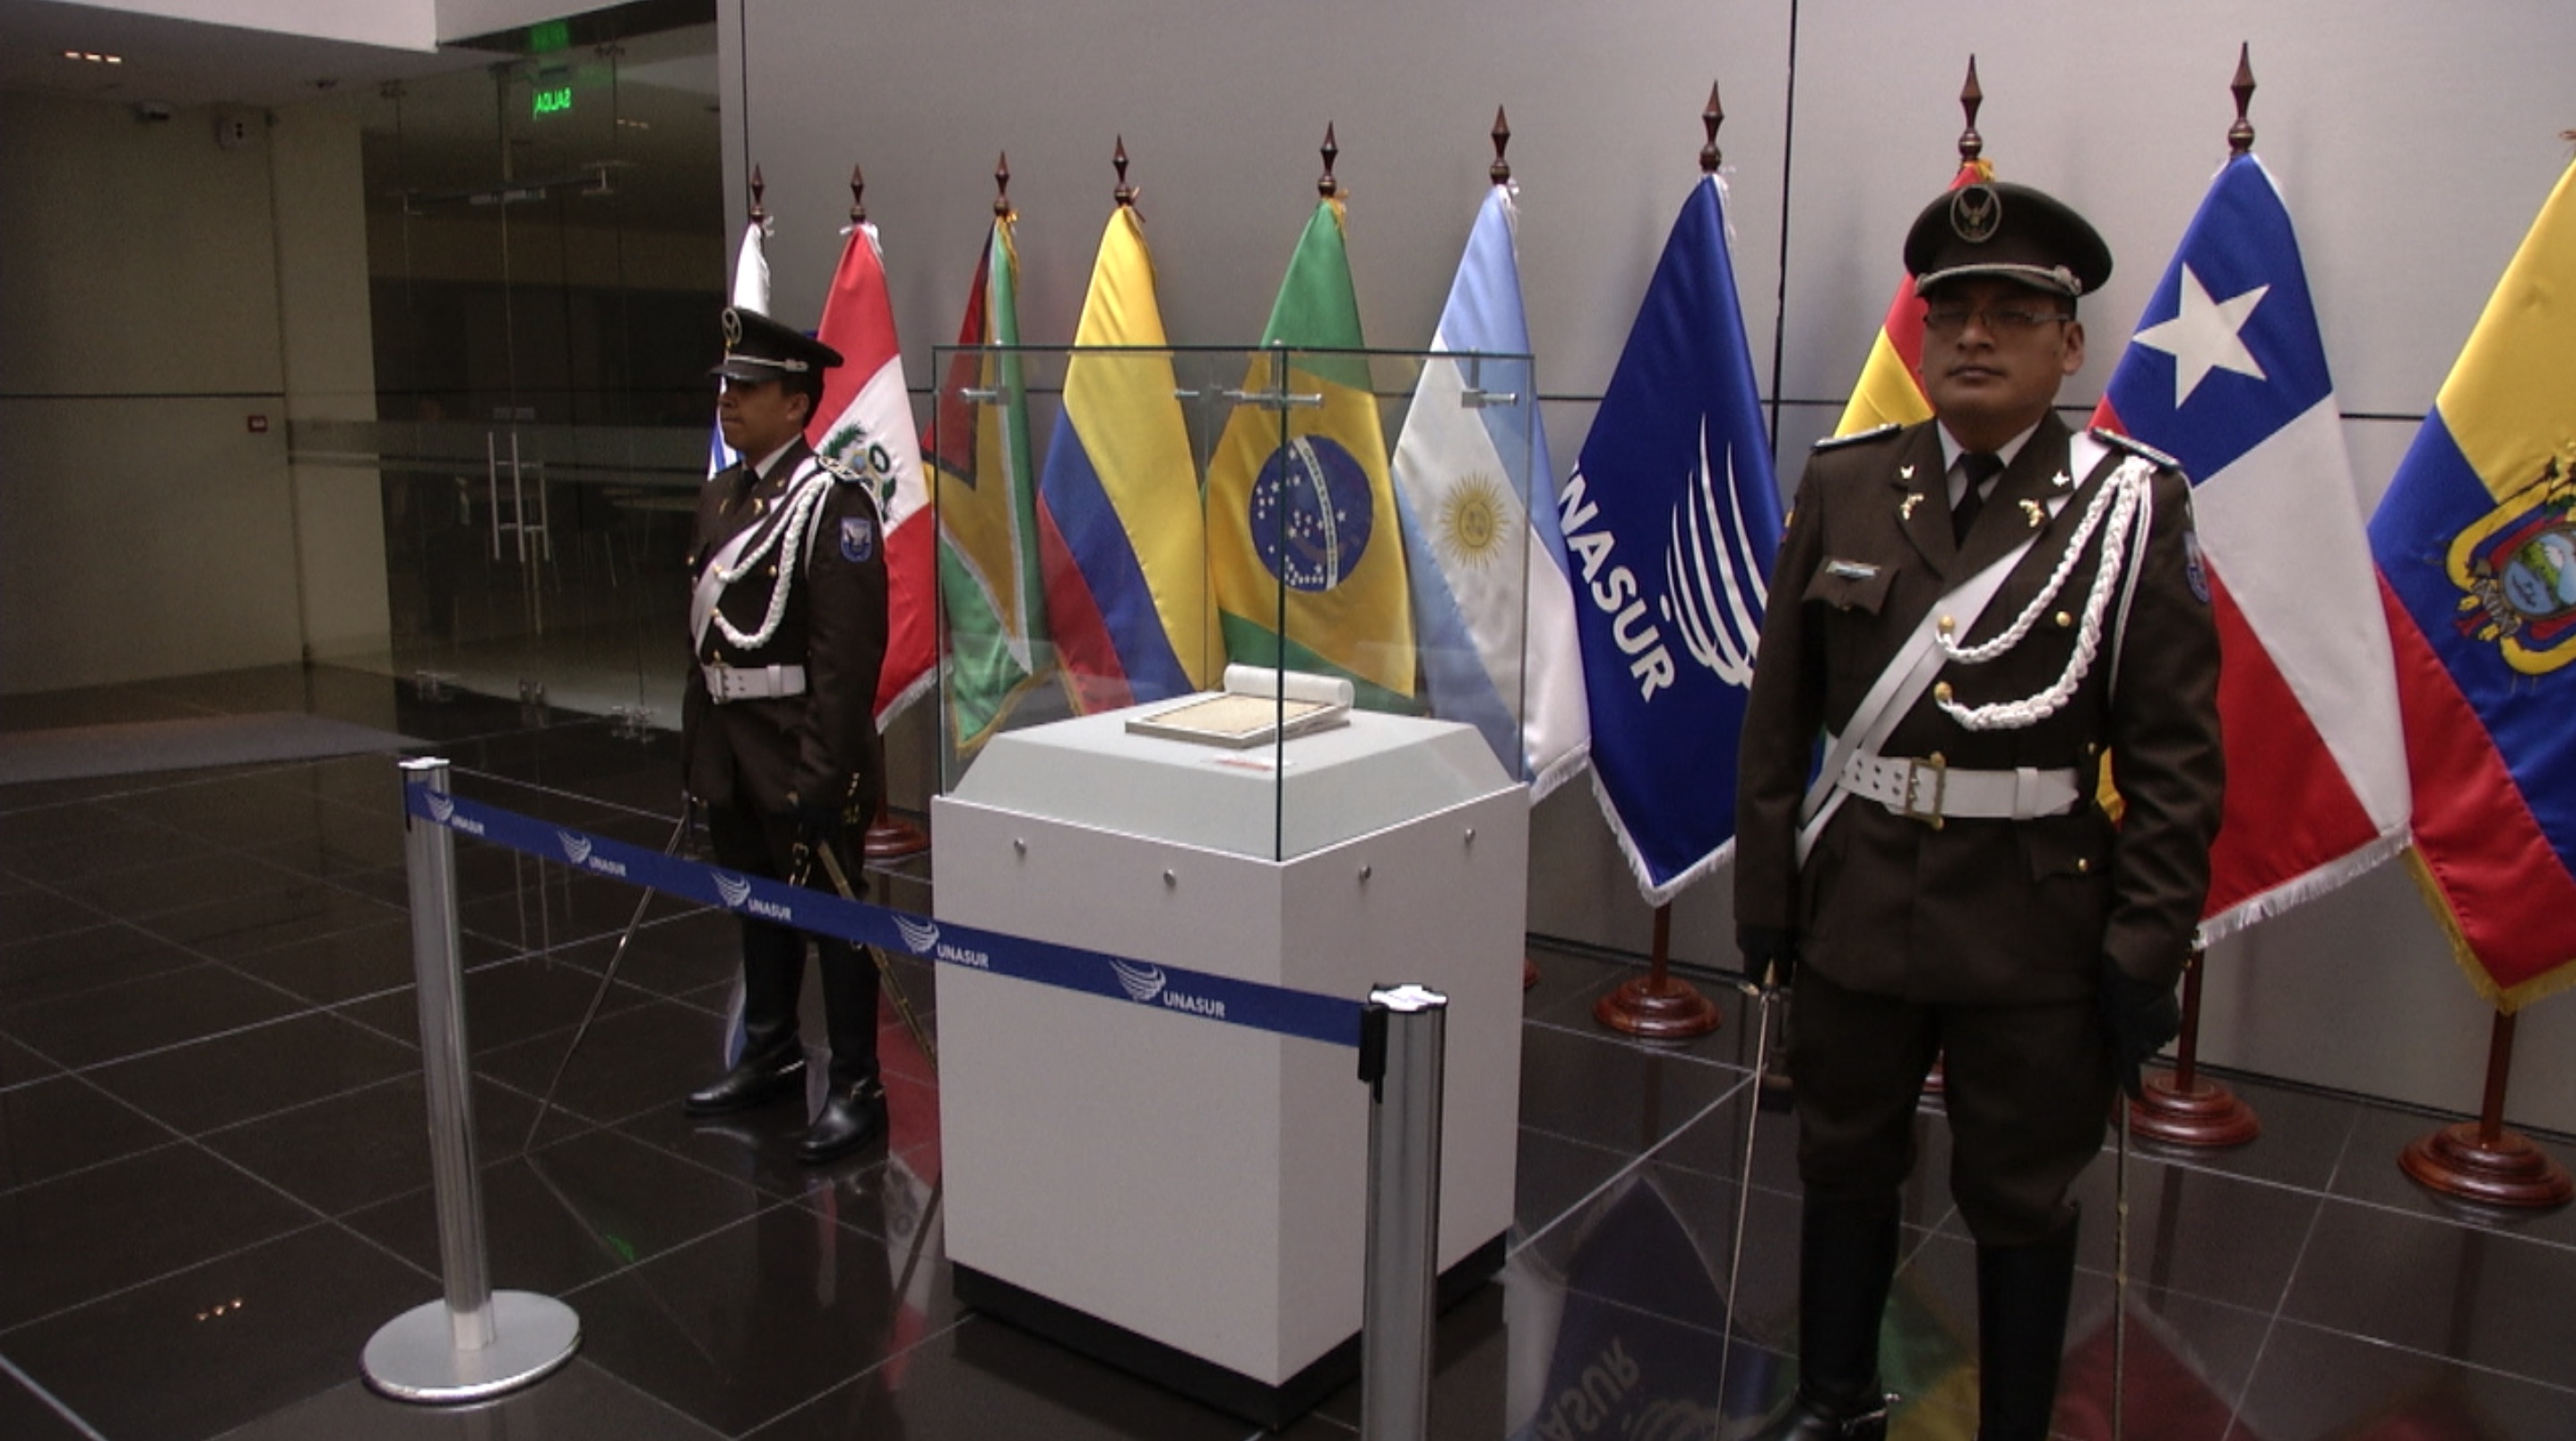 The Jamaica Letter was present at Unasur for the Congress of History (teleSUR)